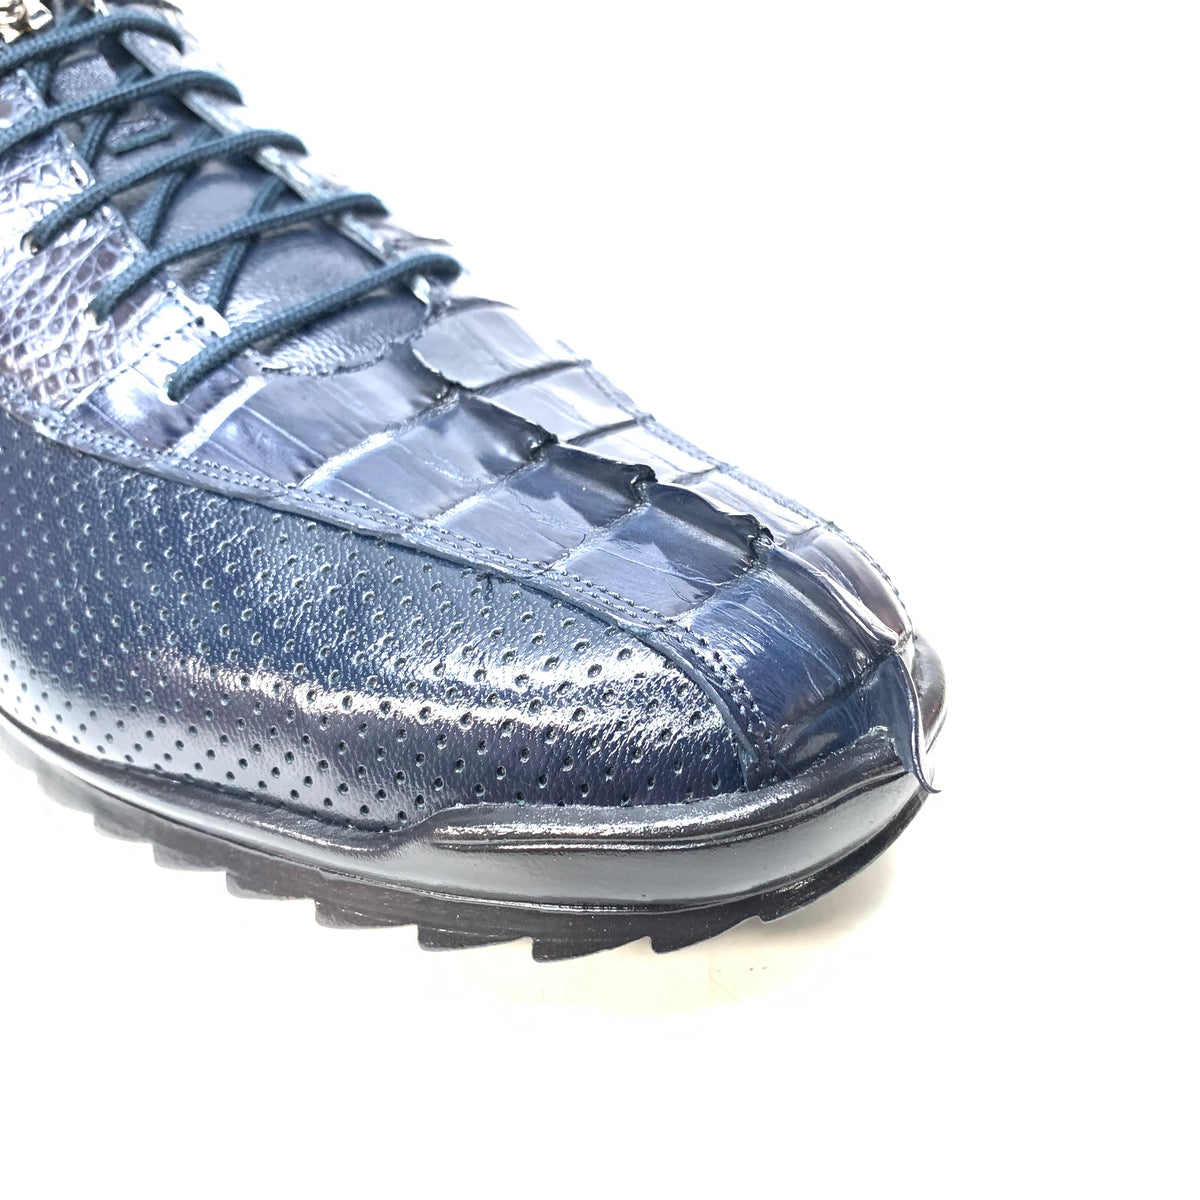 Los Altos Navy Blue Perforated Crocodile Tail Sneakers - Dudes Boutique